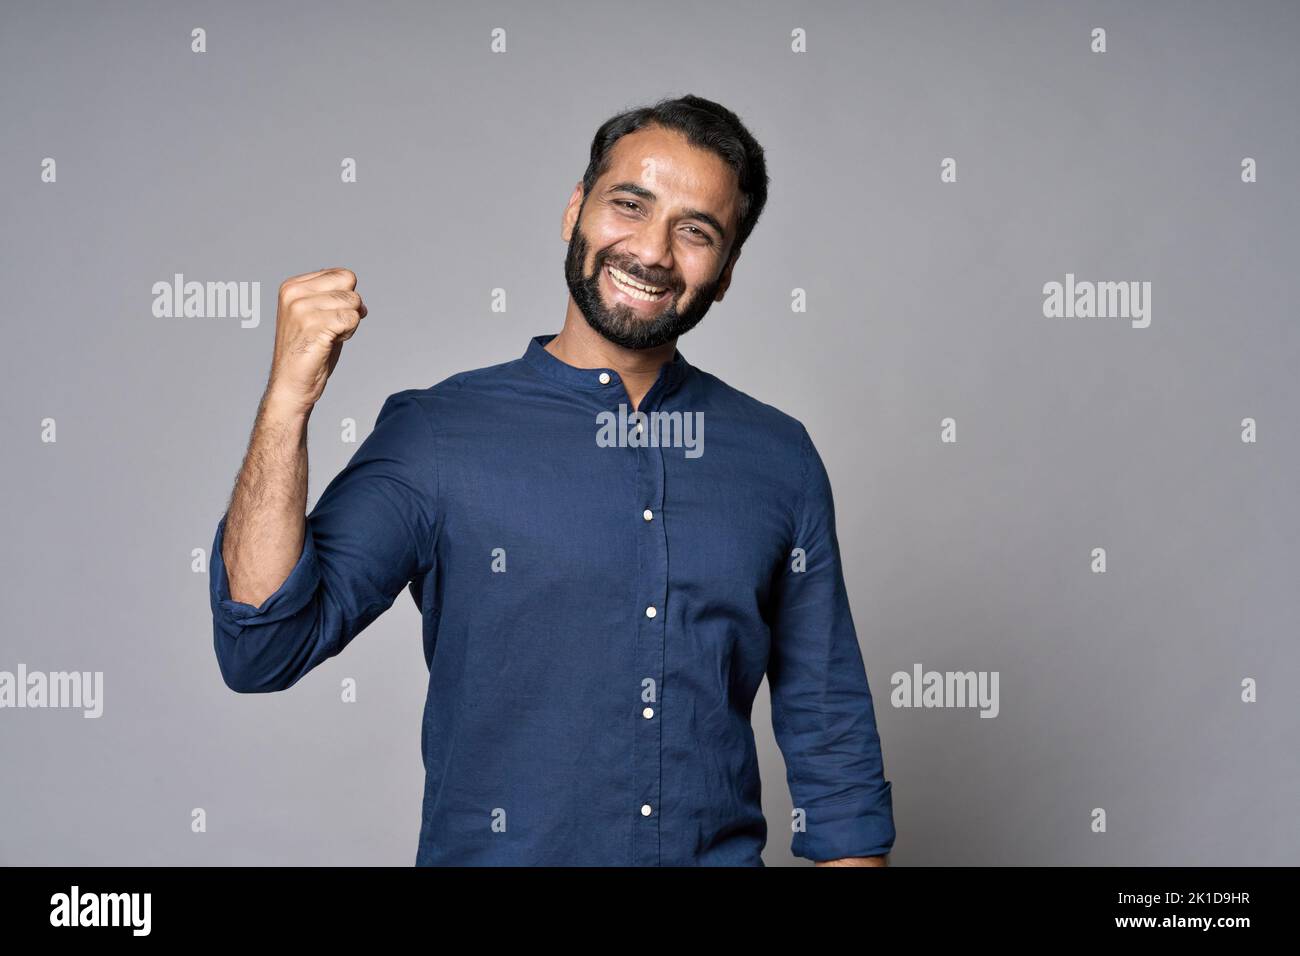 Happy rich indian businessman investor raising fist isolated on gray background. Stock Photo